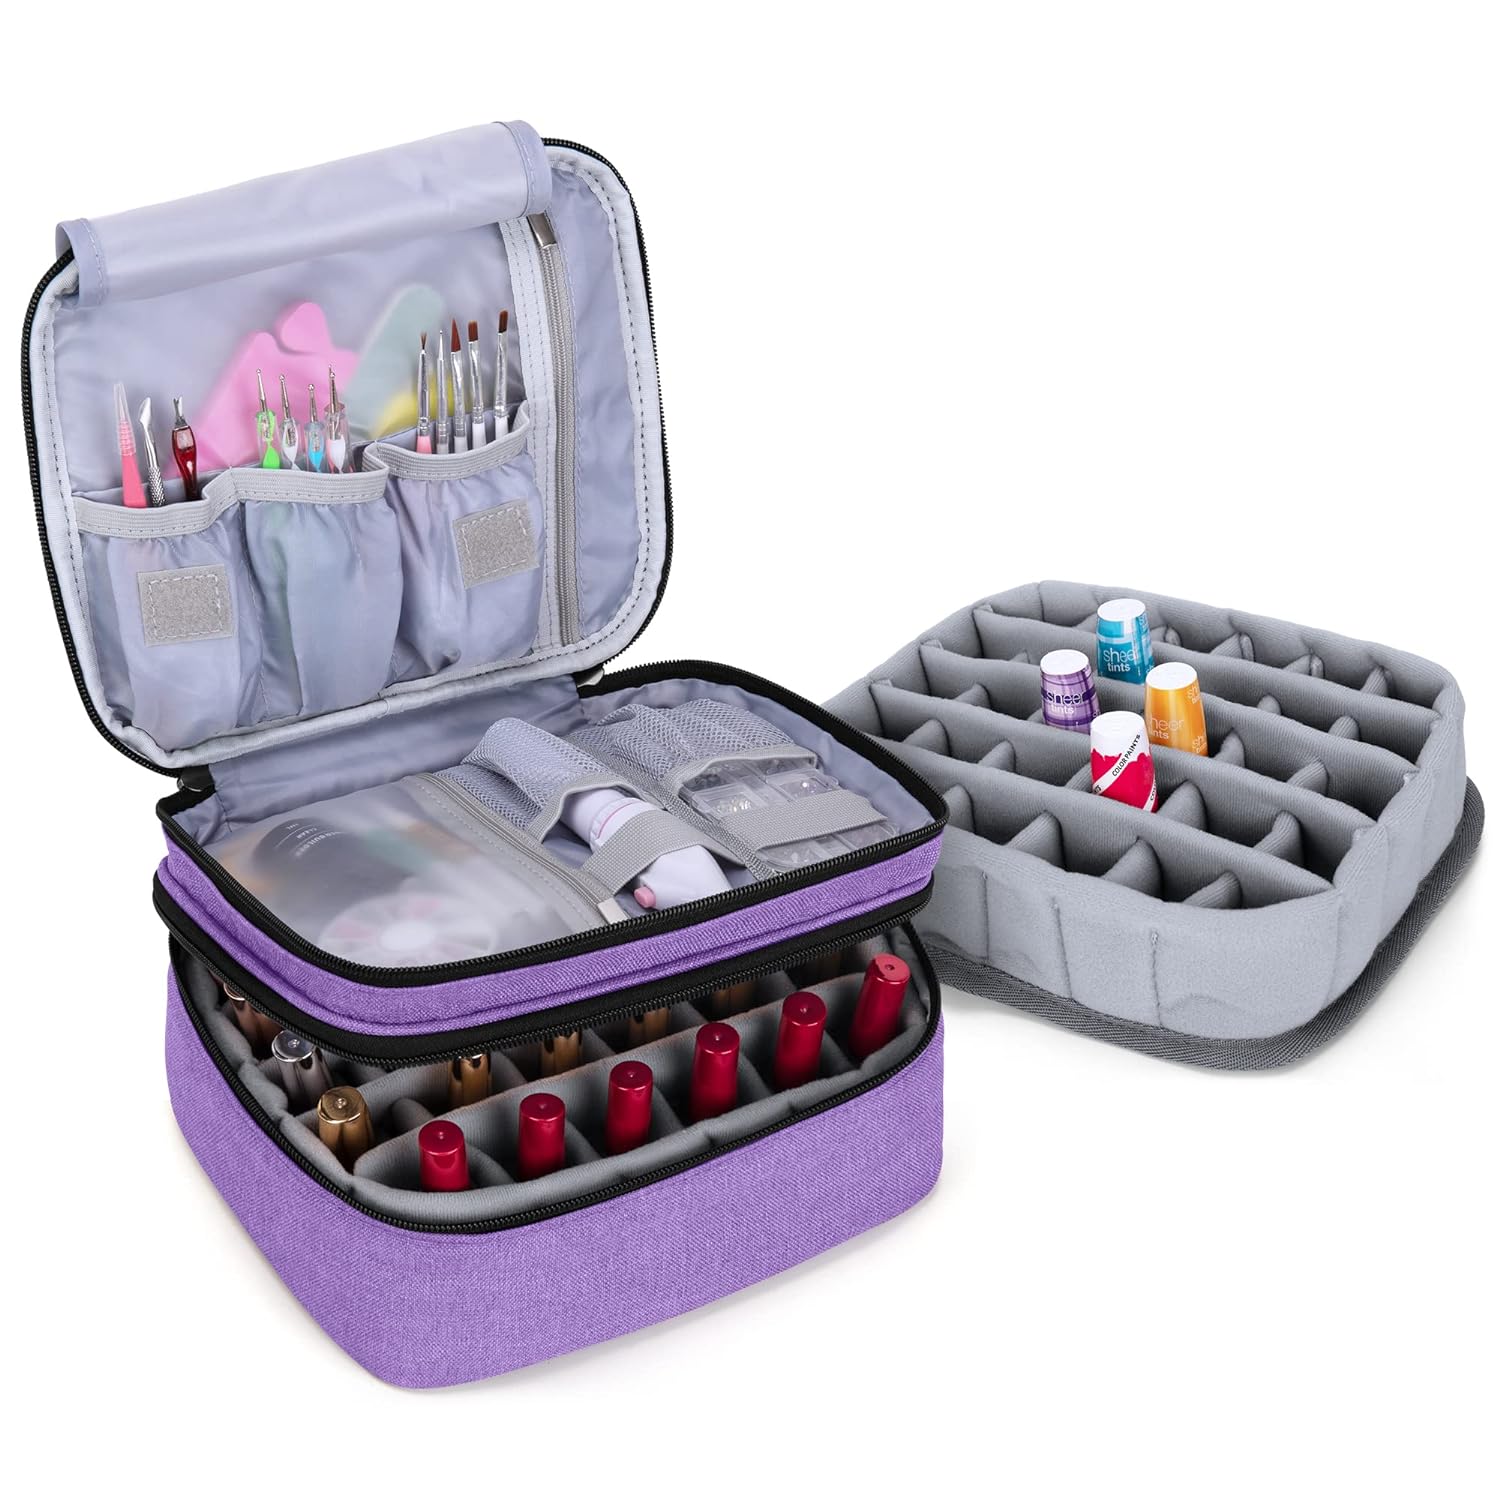 LUXJA Nail Polish Carrying Case - Holds 30 Bottles (15ml - 0.5 fl.oz), Double-layer Organizer for Nail Polish and Manicure Set, Purple (Bag Only)